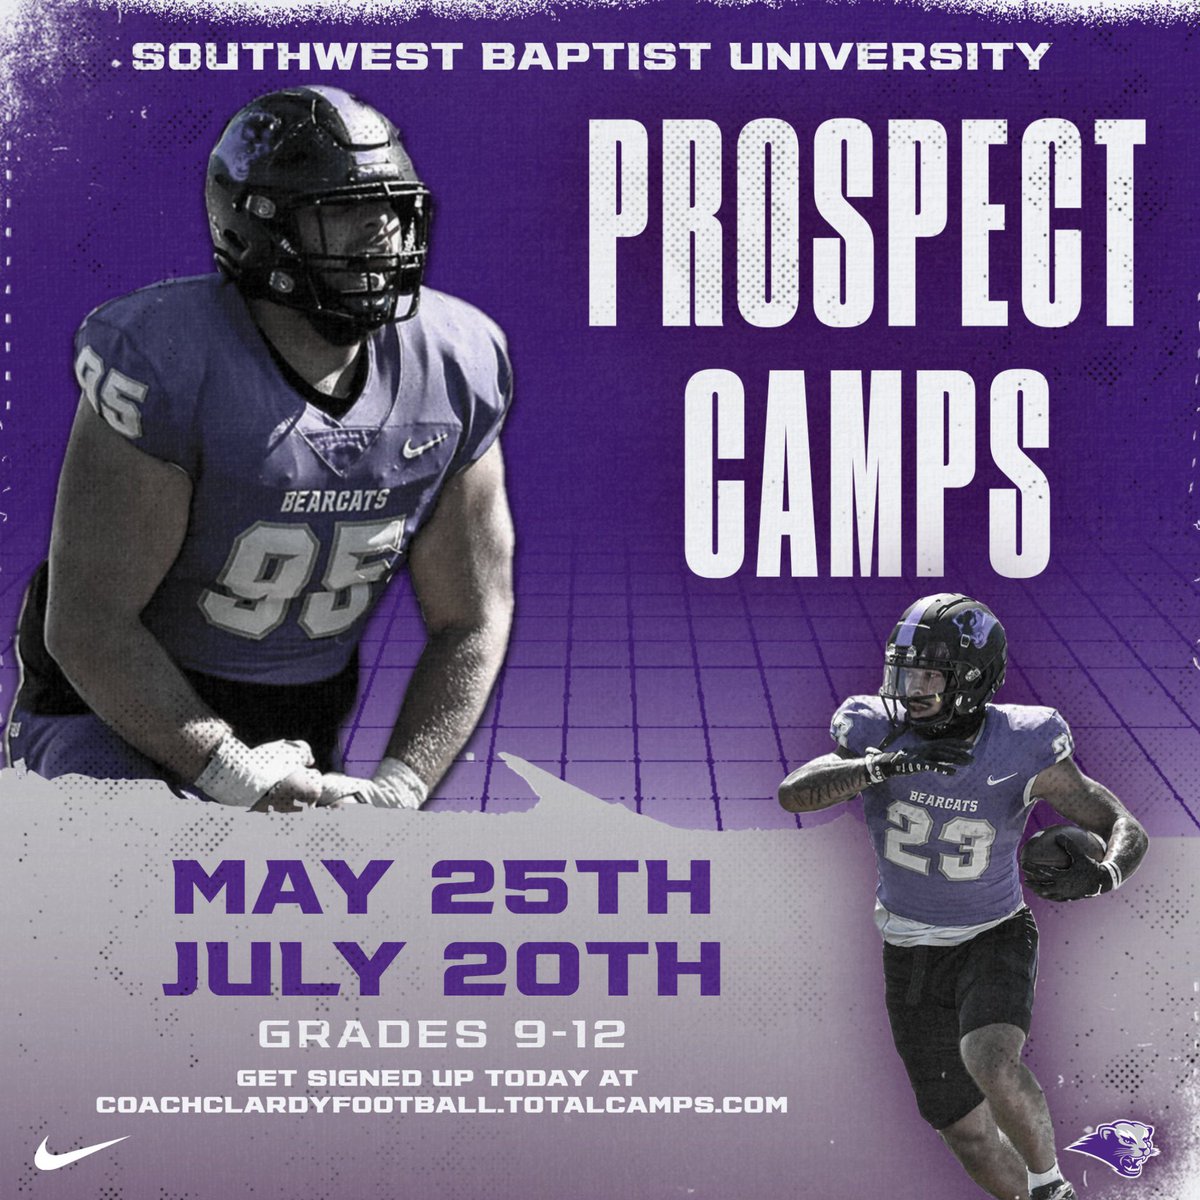 First chance to go camping with the Bearcats is right around the corner! Can’t wait to see all of these prospects and future bearcats on campus. #rollcats 
coachclardyfootball.totalcamps.com/shop/EVENT